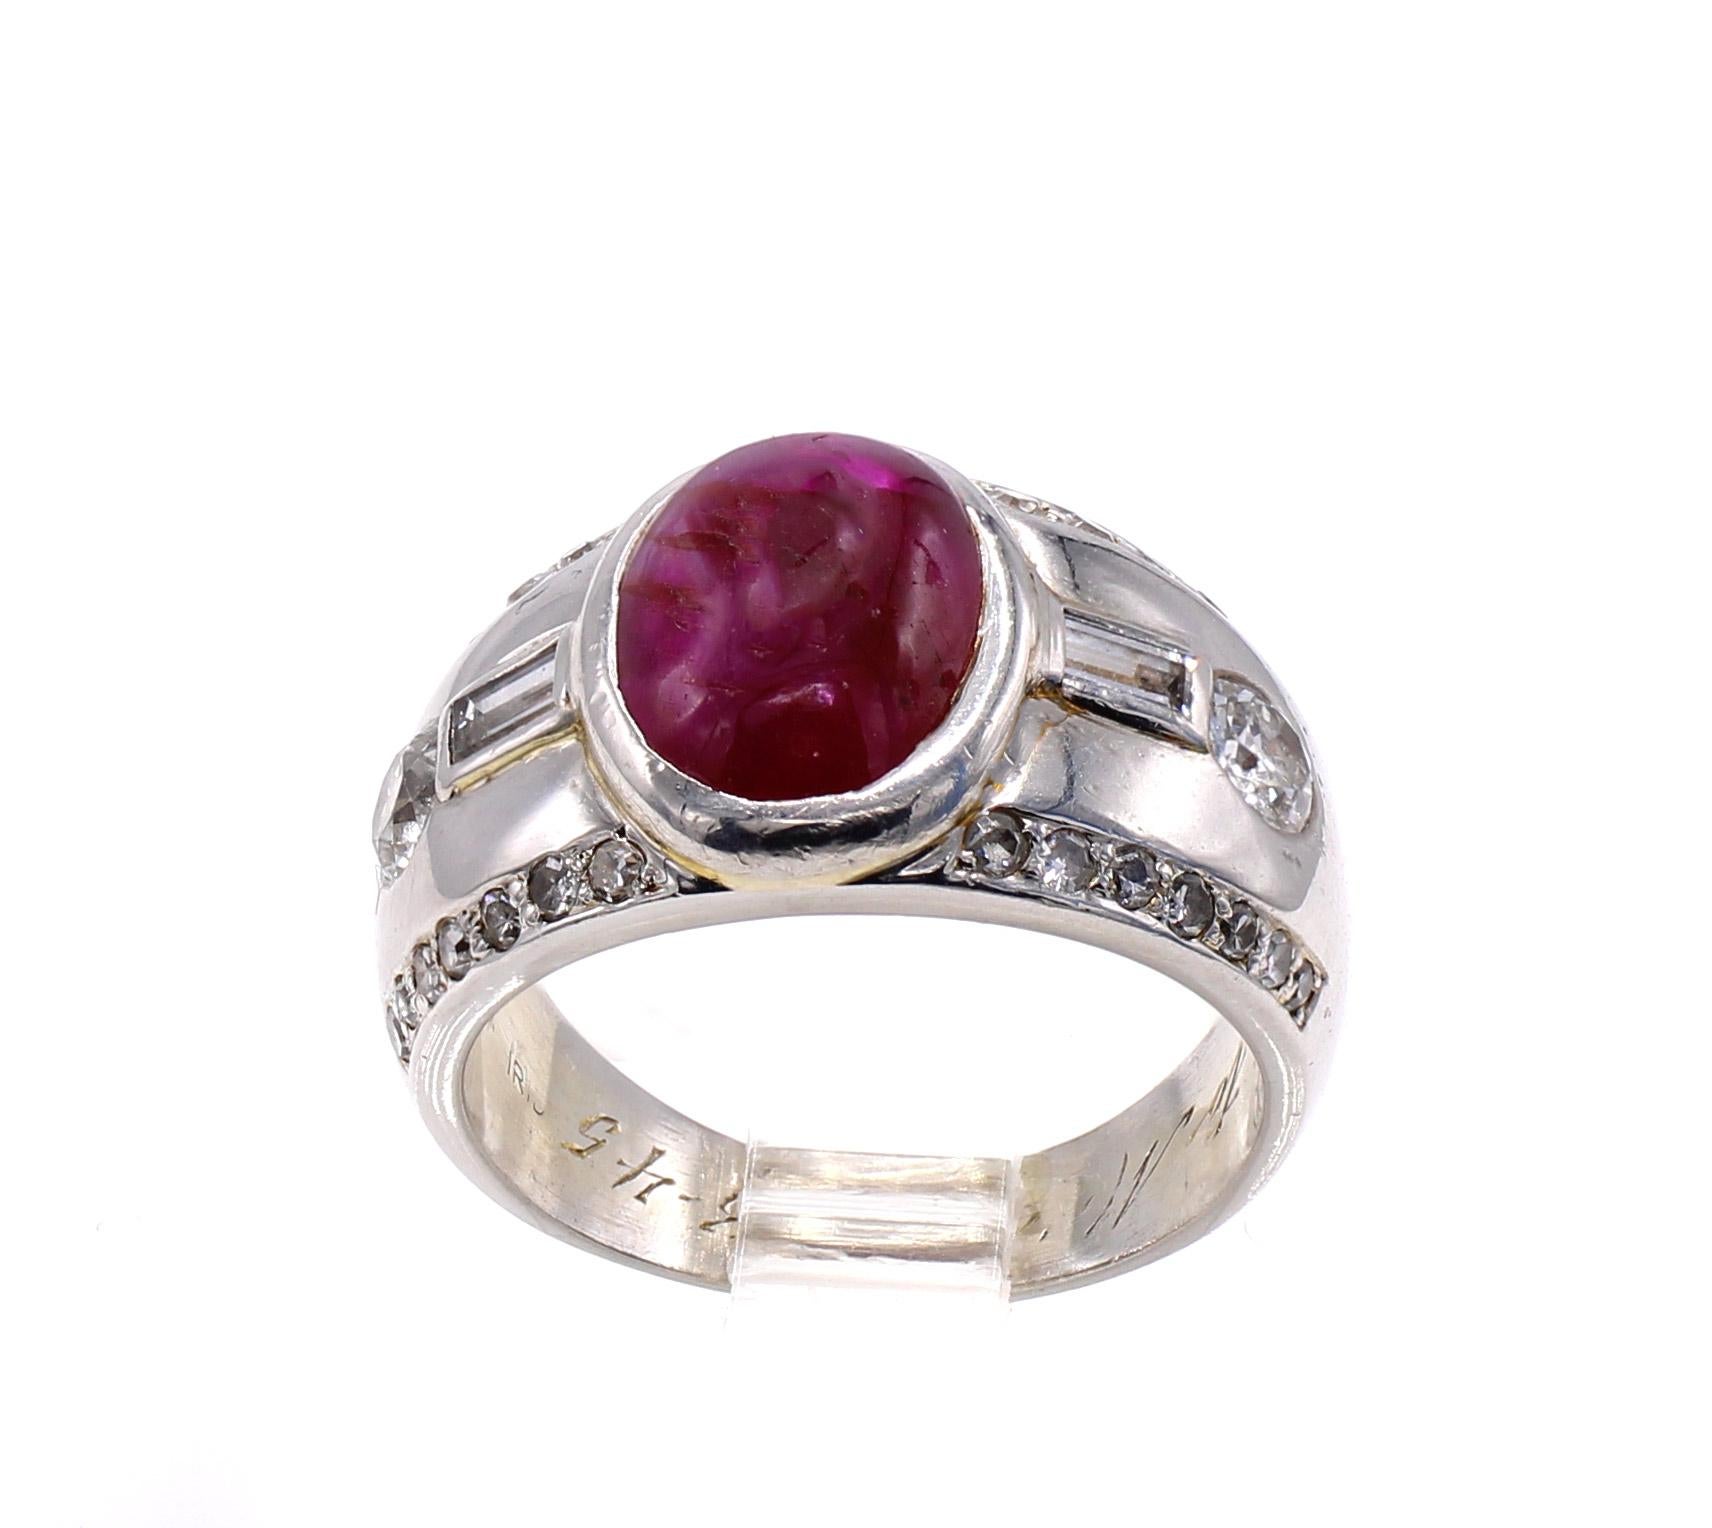 The centerpiece of this well handcrafted platinum Retro ring from ca 1945 is a pigeon blood red cabochon ruby estimated to weigh approximately 3.60 carats. The bezel set ruby is flanked by a baguette cut and one Old European Cut diamond on either